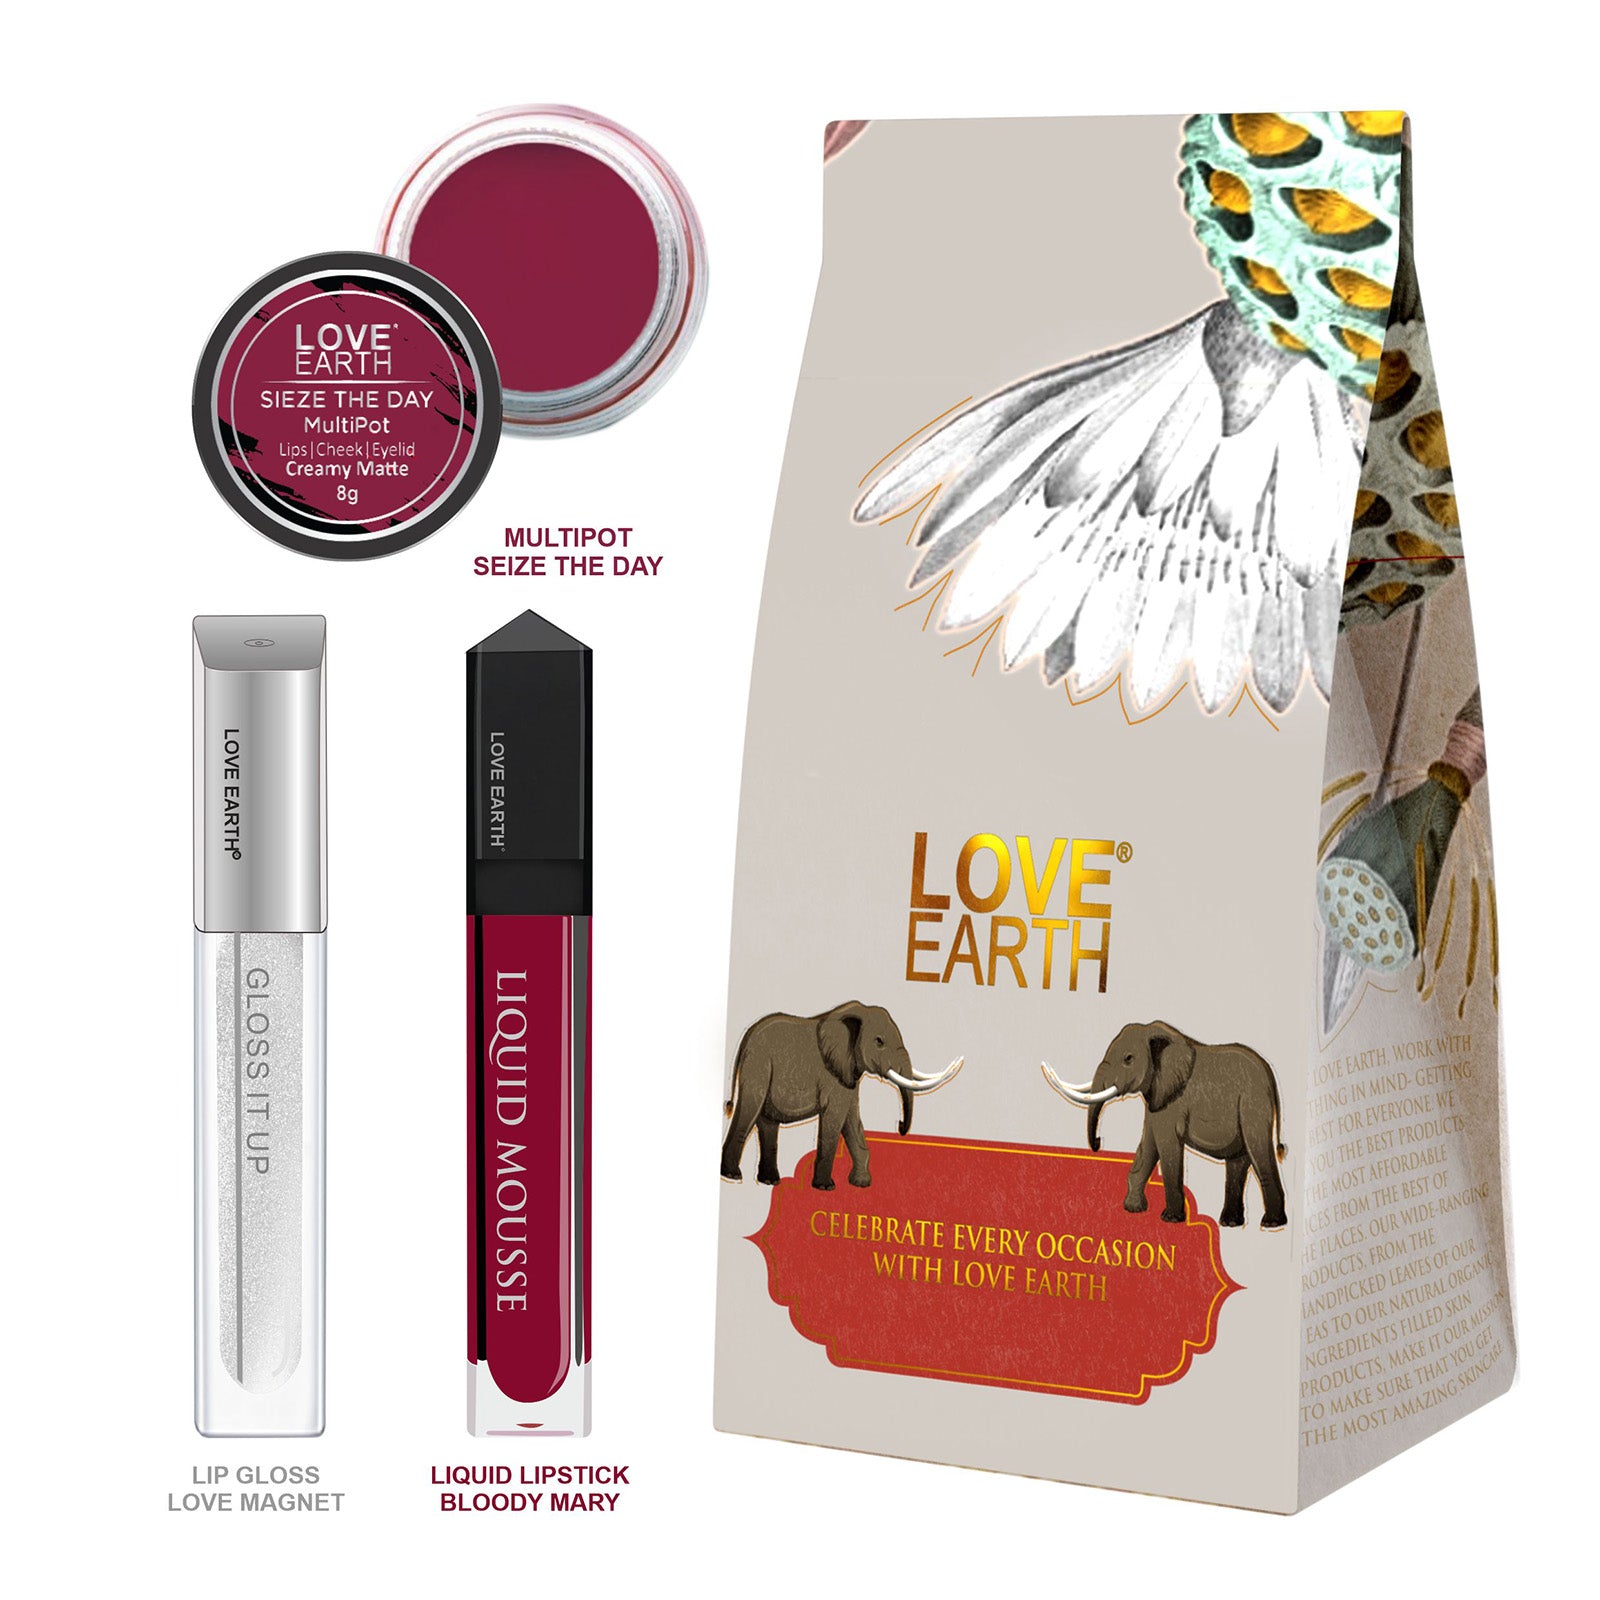 Lip And Cheek Tint Seize The Day, Liquid Lipstick Bloody Mary & Lip Gloss Love Magnet Gift Pack